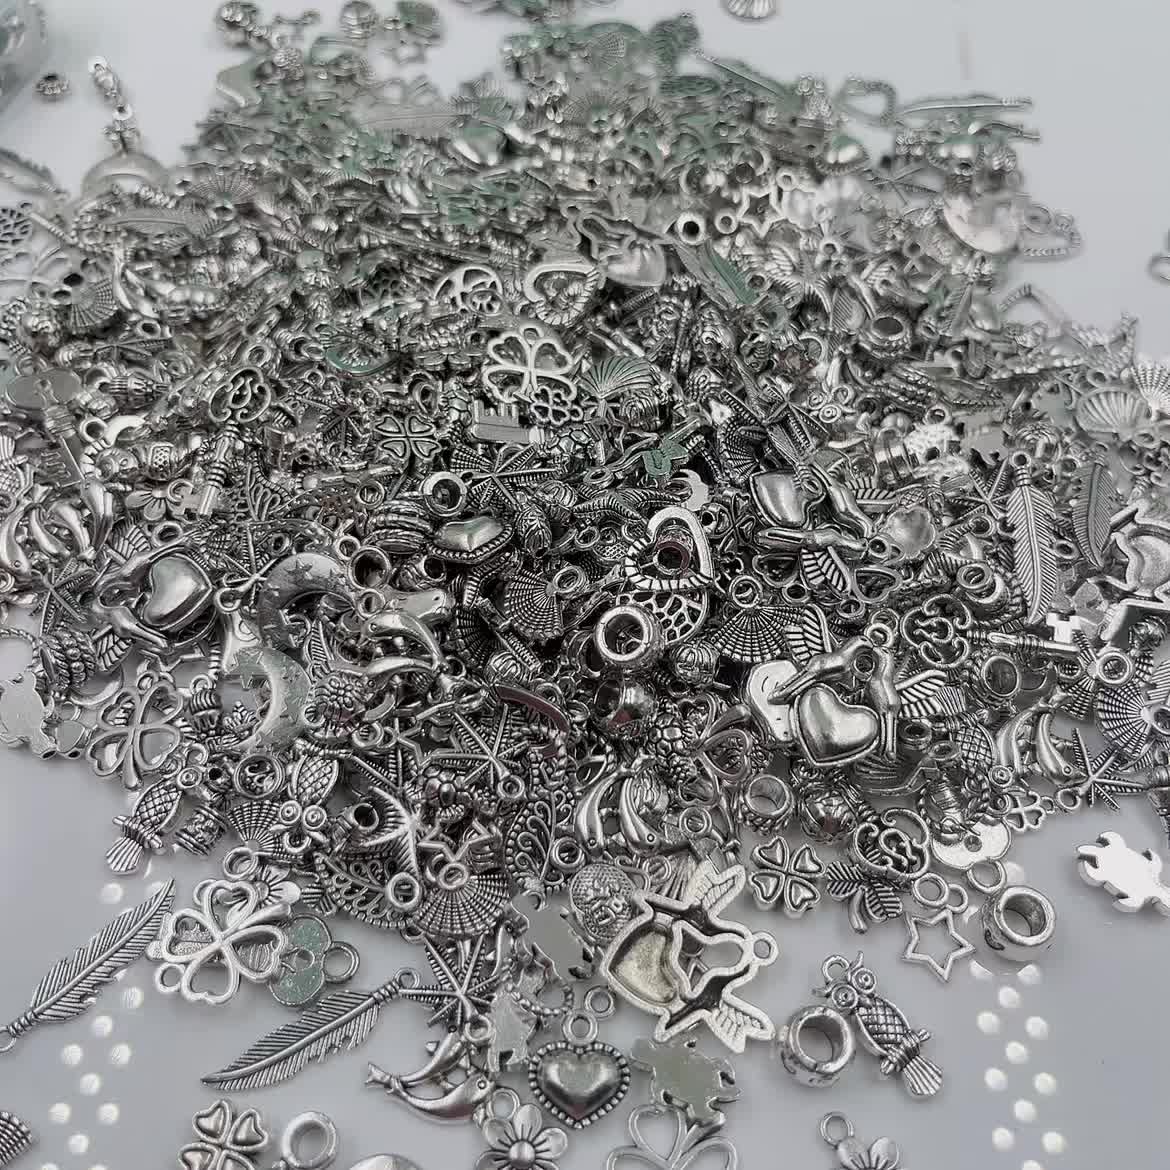  60 Pieces Antique Silver Fashion Jewelry Making Charms Findings  JULG0 Bow Tie Bowtie Crafting Bulk Accessoires for Pendant Necklace Bracelet